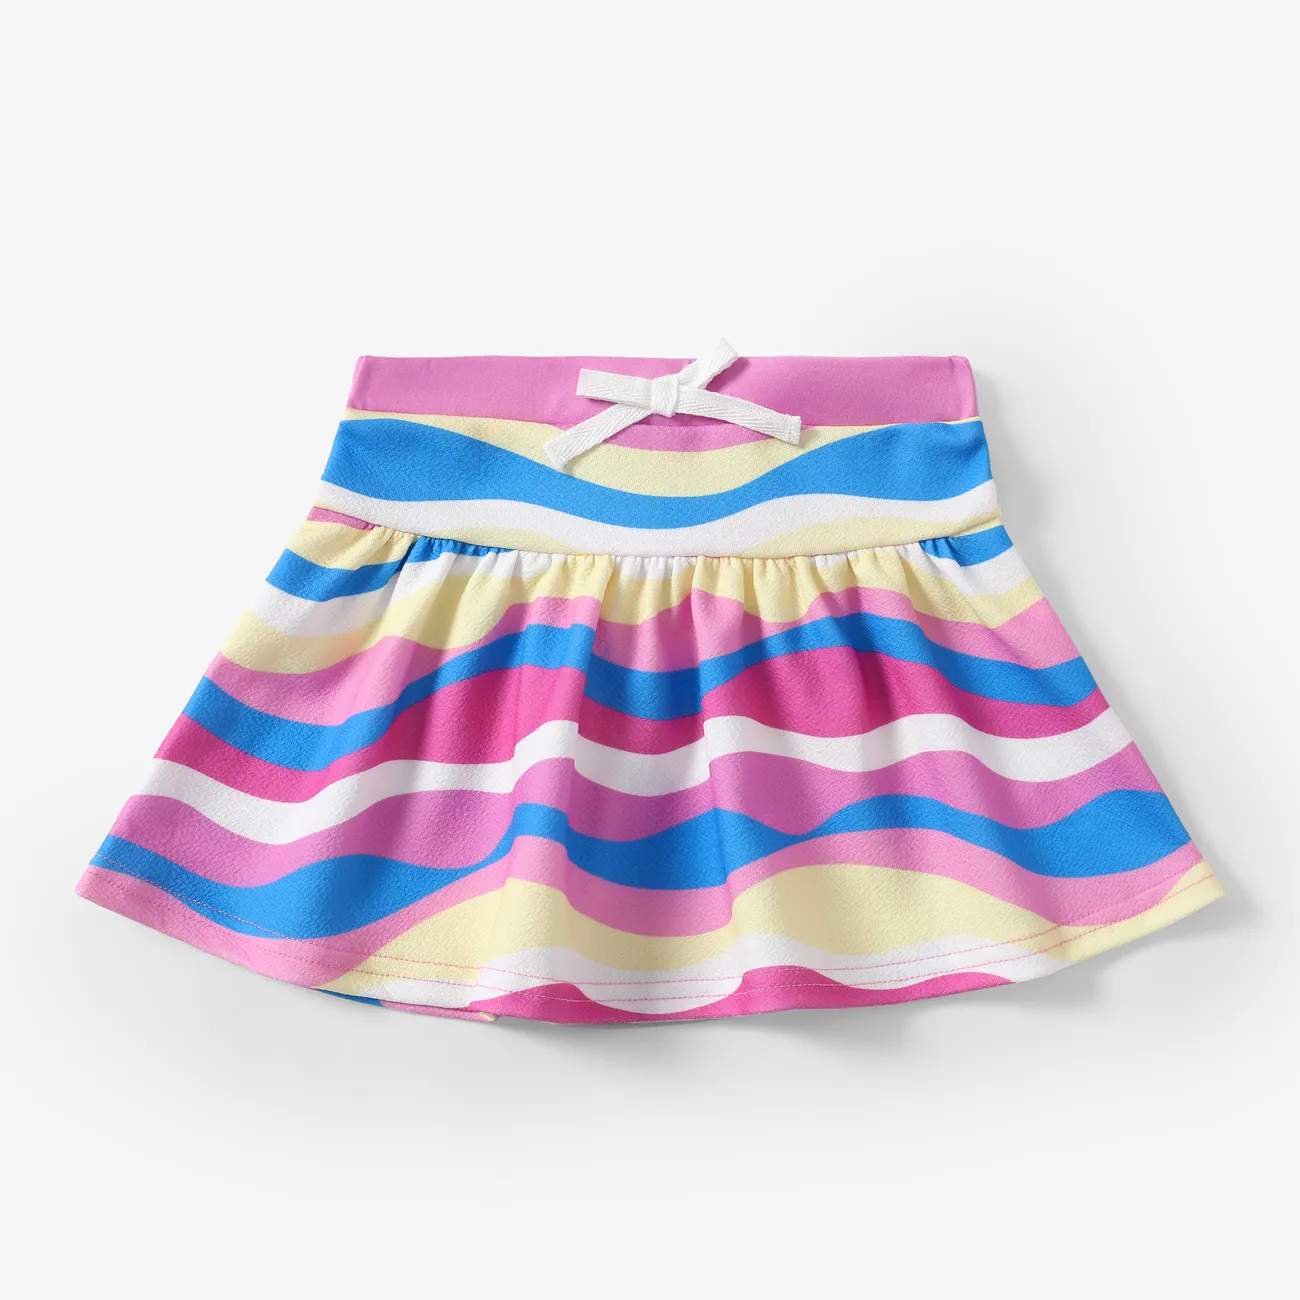 Paw Patrol Toddler Girls 2pcs Summer-theme Character Print Flutter-sleeve Top with Striped Skirt Set PINK-1 big image 1